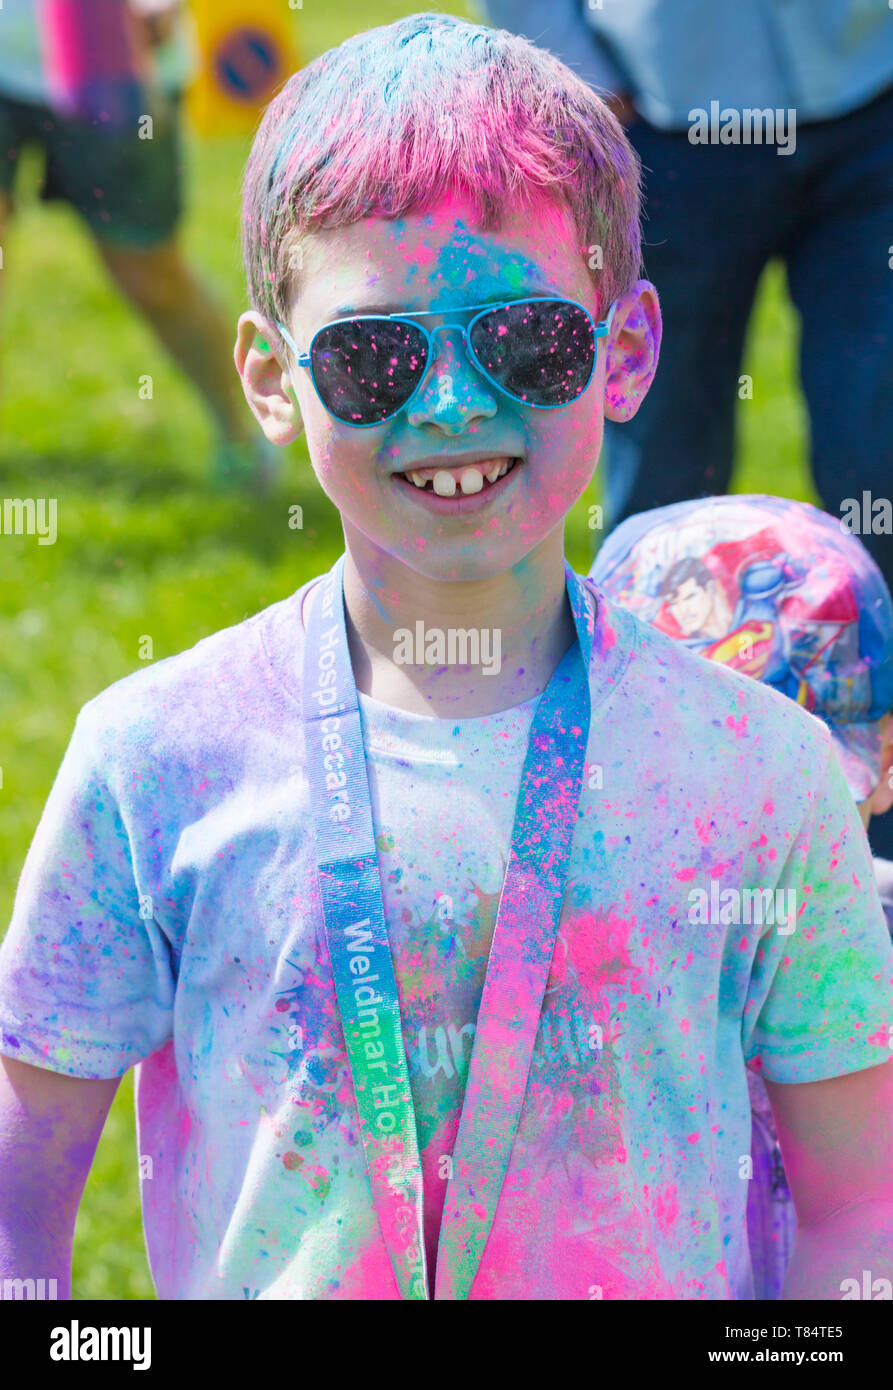 Weymouth, Dorset, UK. 11th May 2019. Weldmar's last ever Colour Run takes place at Weymouth to raise funds for the charity. Participants have fun getting covered in brightly coloured powder paint. Credit: Carolyn Jenkins/Alamy Live News Stock Photo